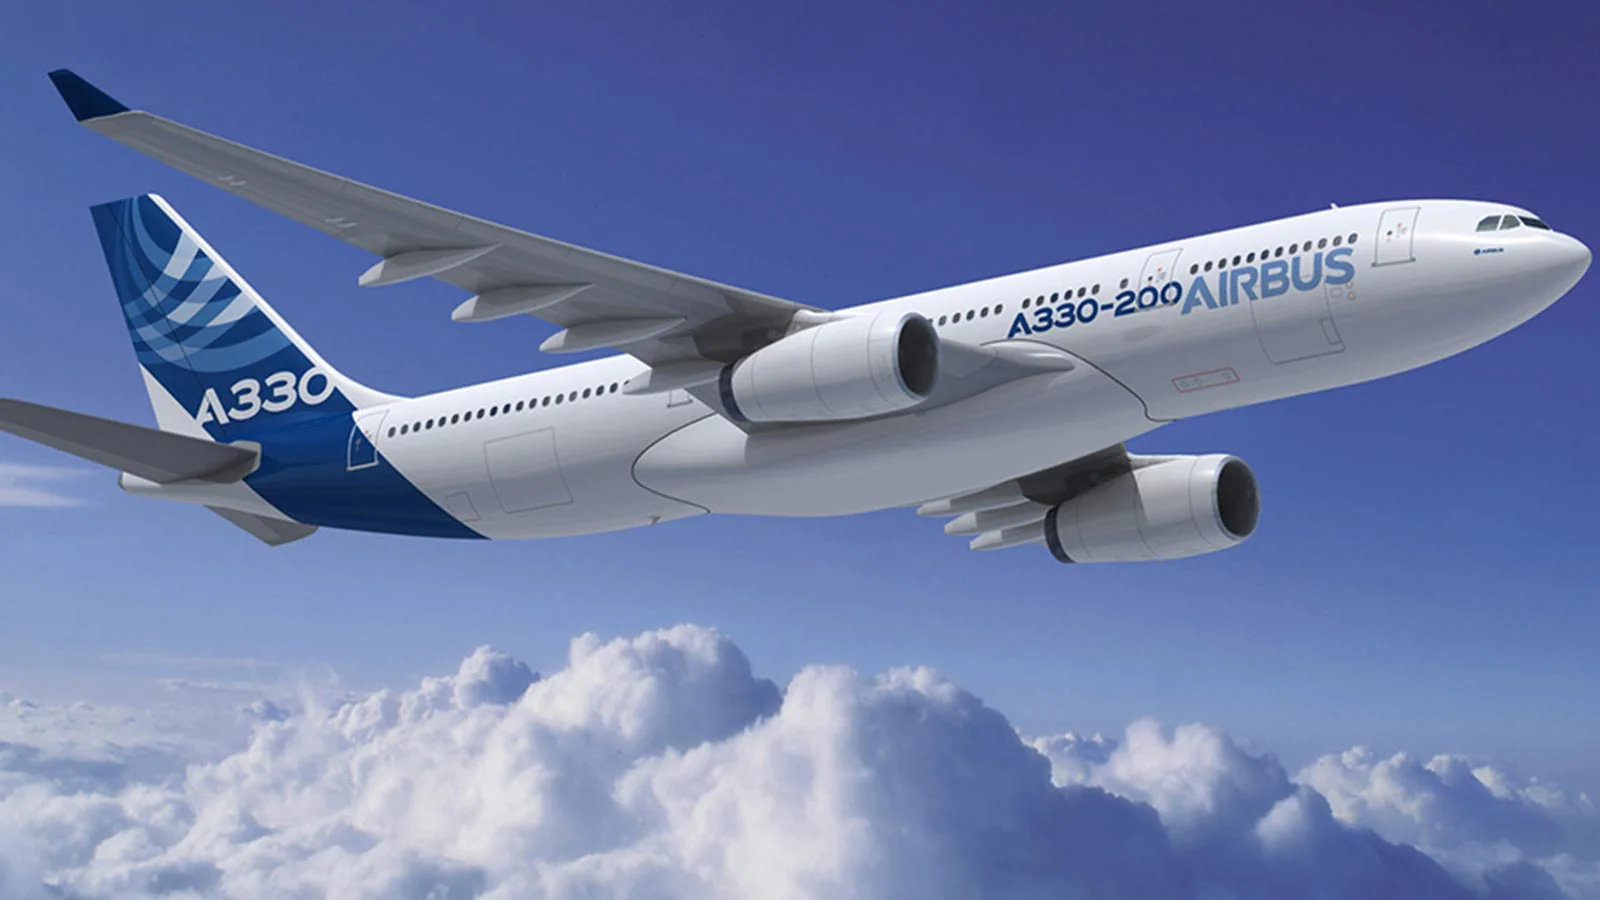 Sentra Airways Lease Airbus A330-200 from Air Lease Corporation